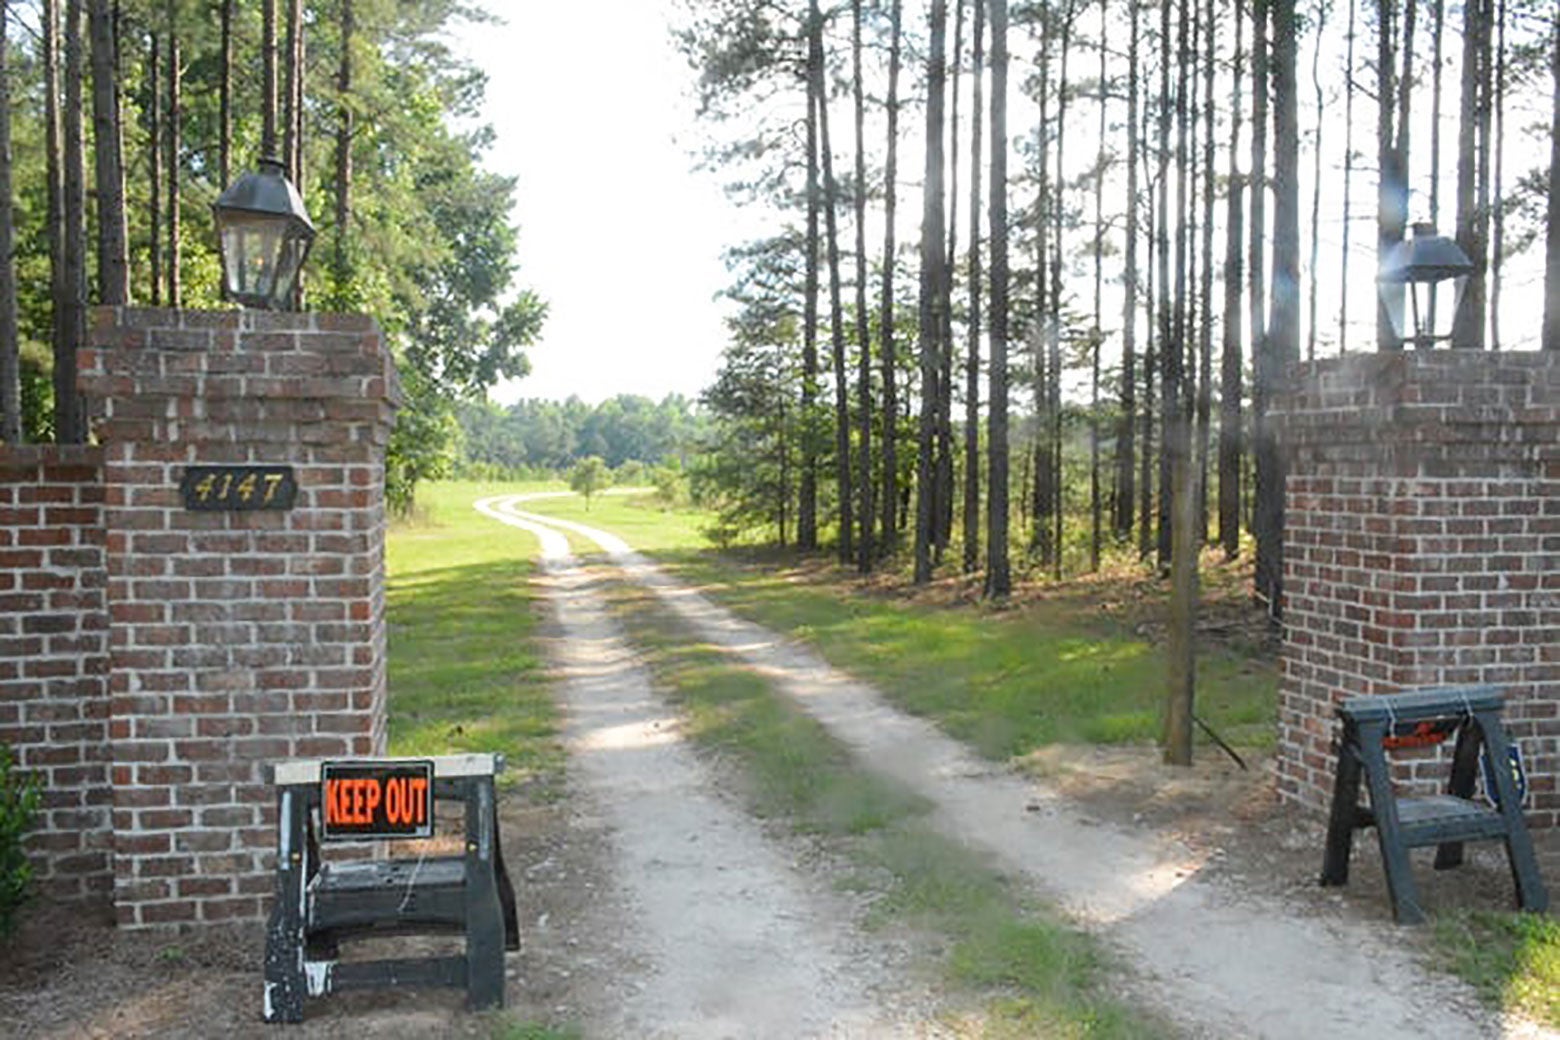 Two sawhorses bearing KEEP OUT signs are seen in front of a brick gate, through which a dirt road is seen.